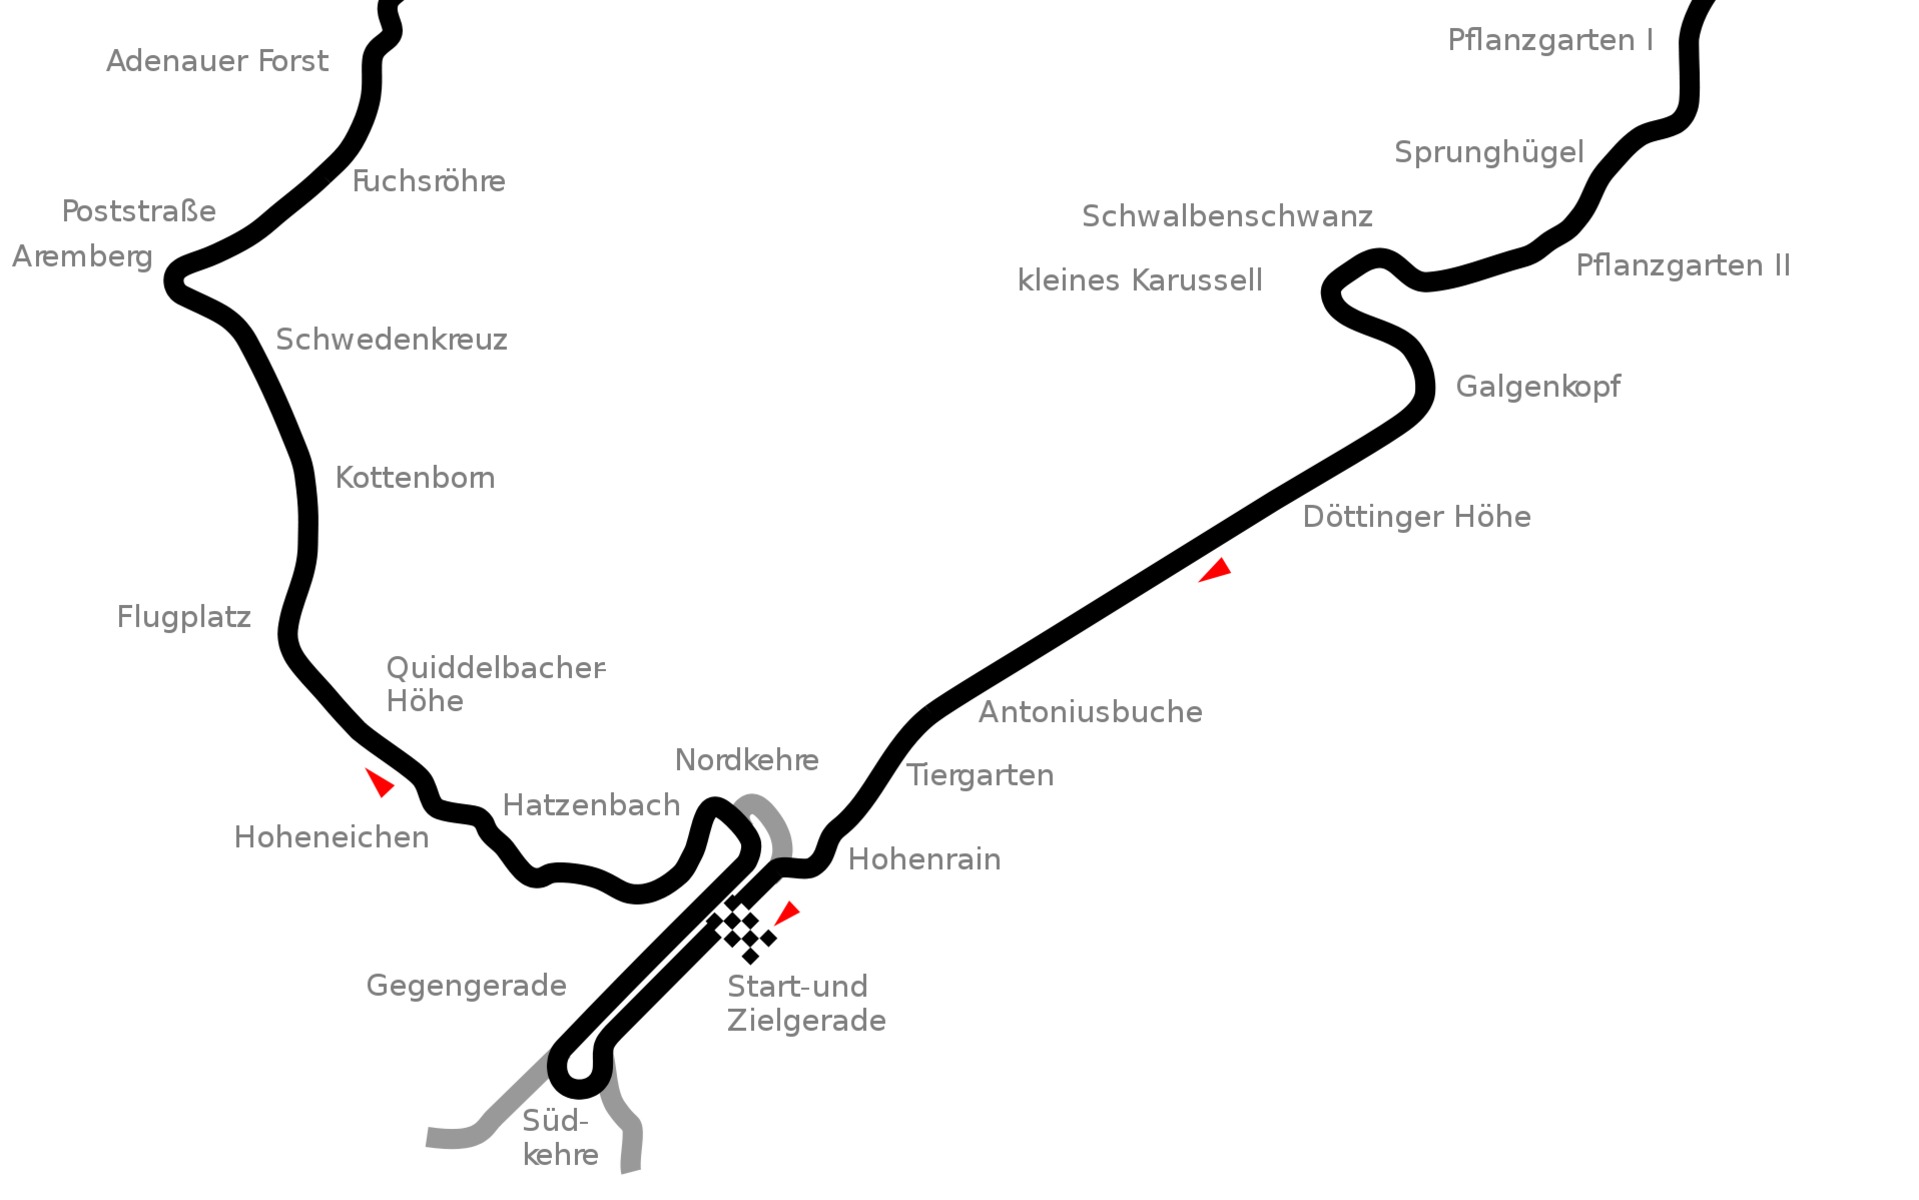 A section of the Nurburgring. Flugplatz is to the left